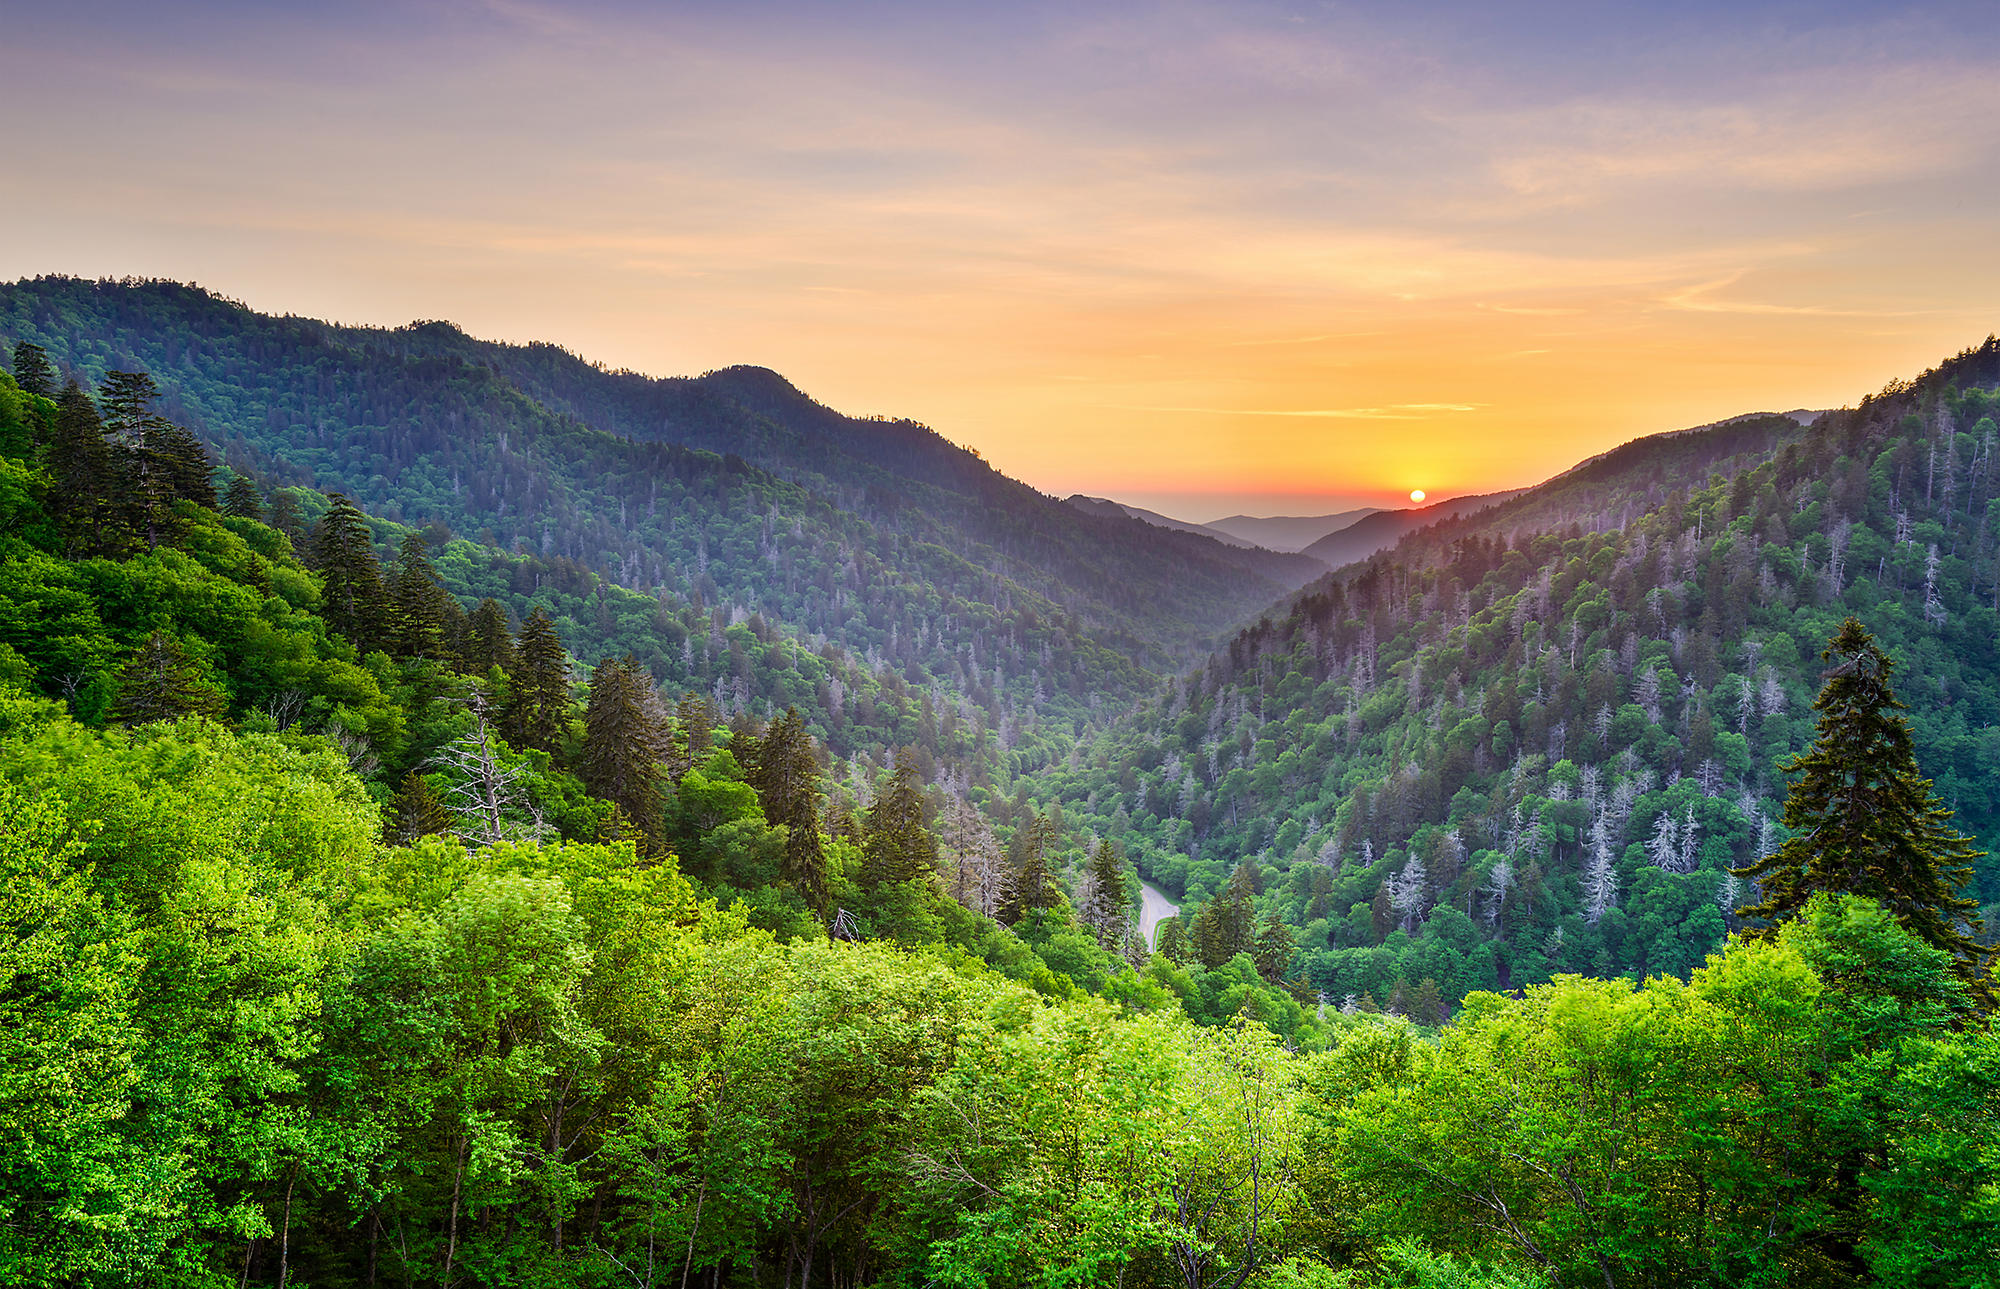 Vacation in Smoky Mountains Tennessee  Bluegreen Vacations